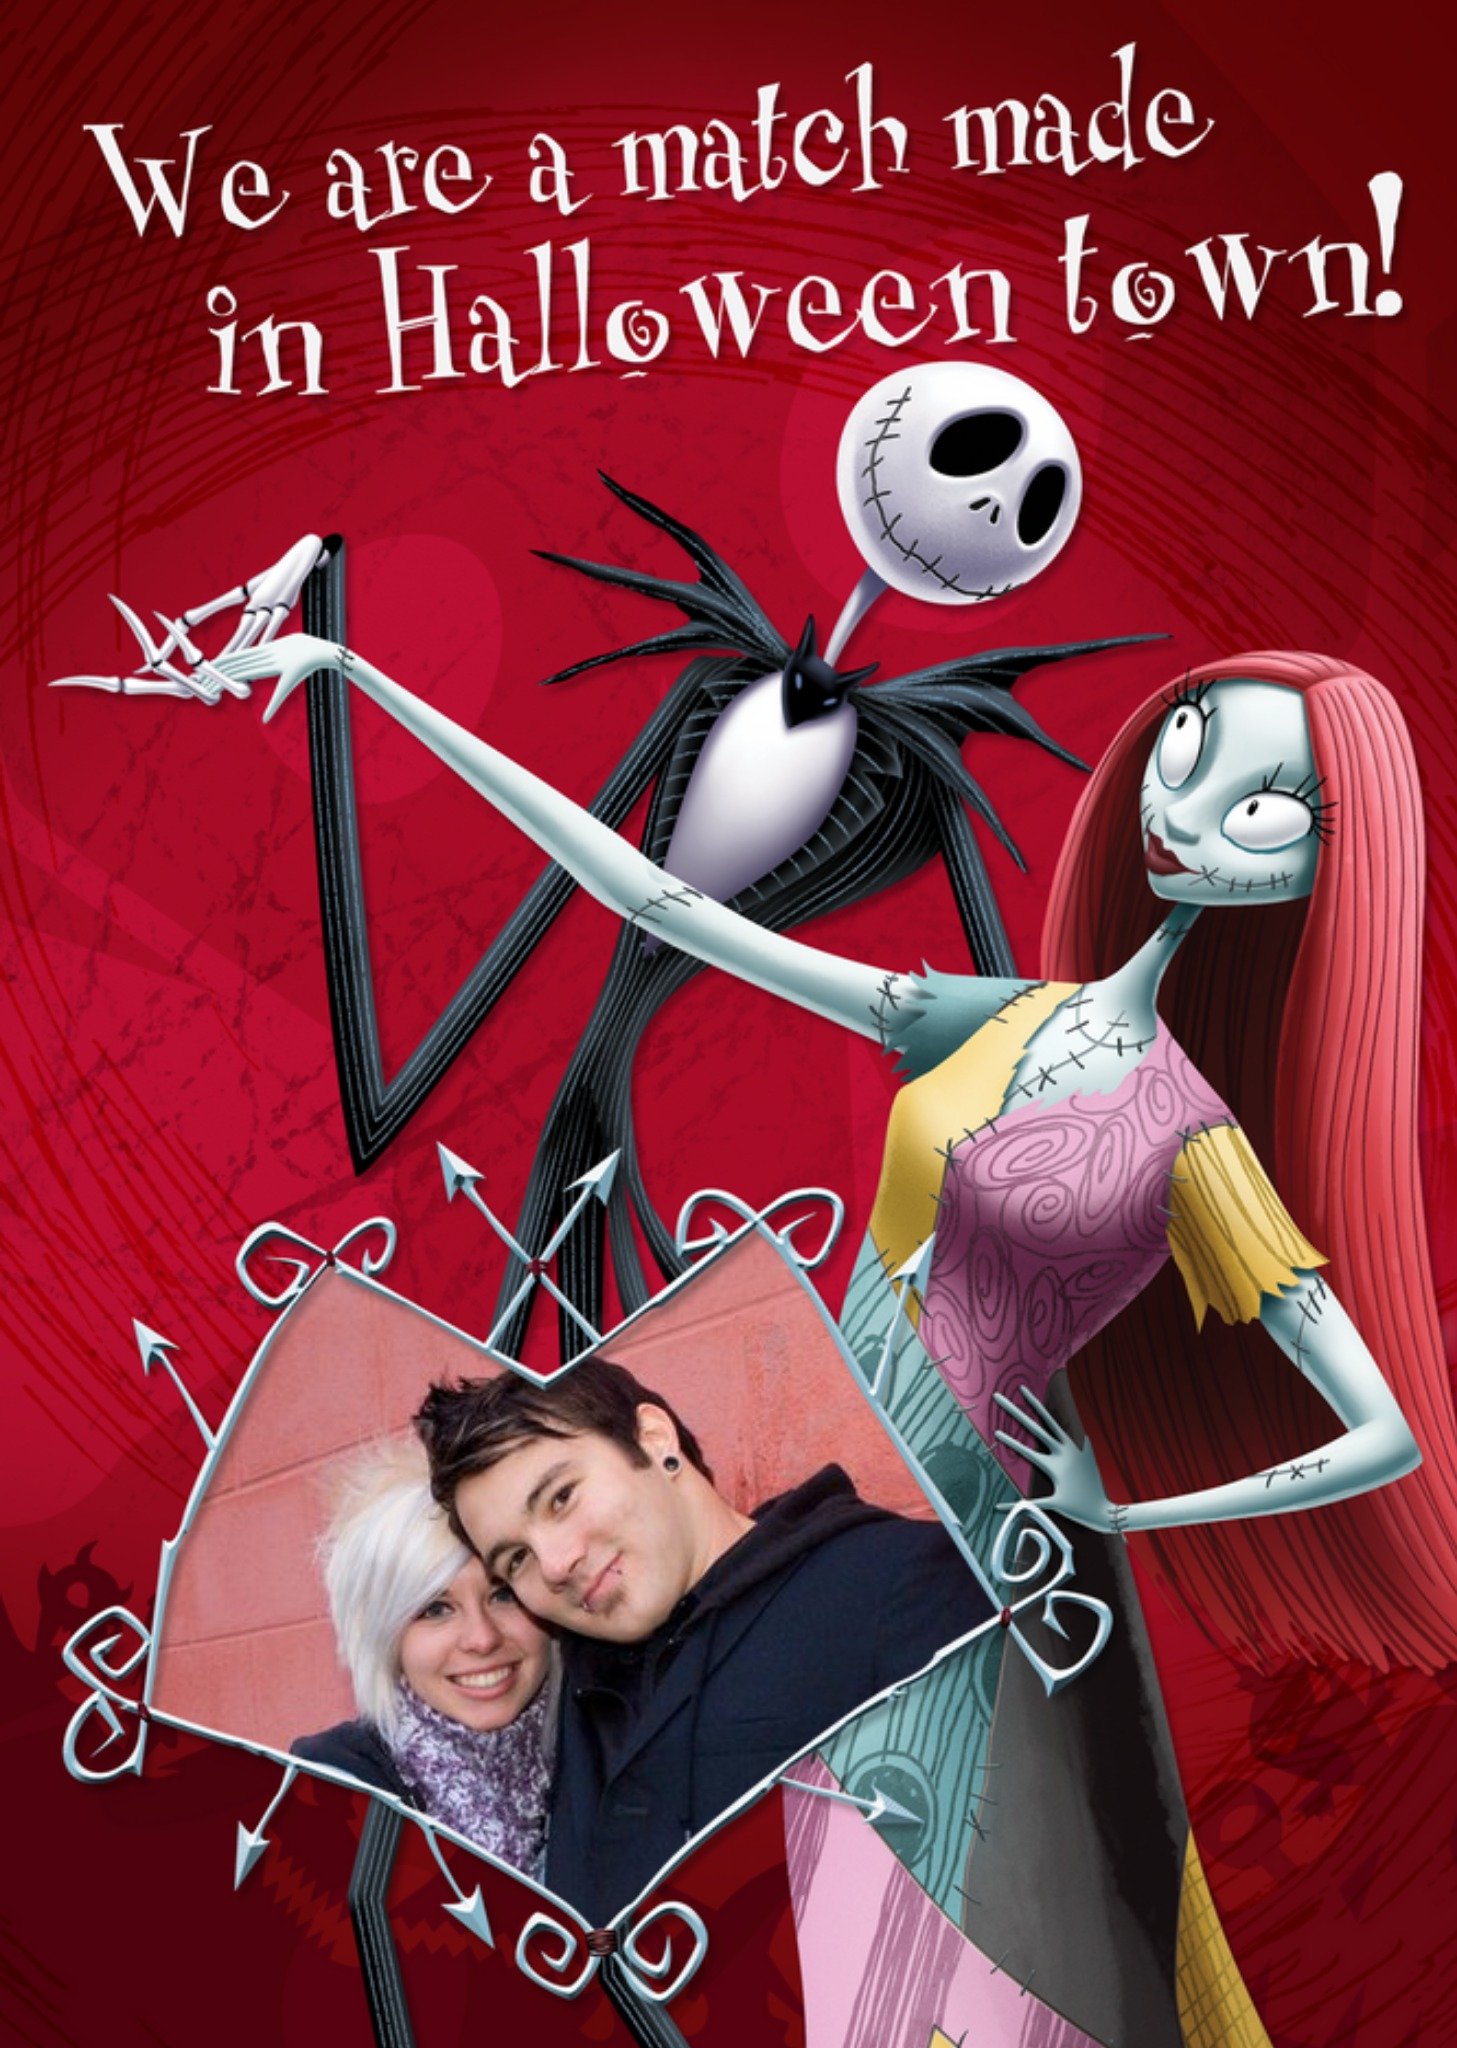 Disney The Nightmare Before Xmas We Are A Match Made In Halloween Town Photo Card Ecard